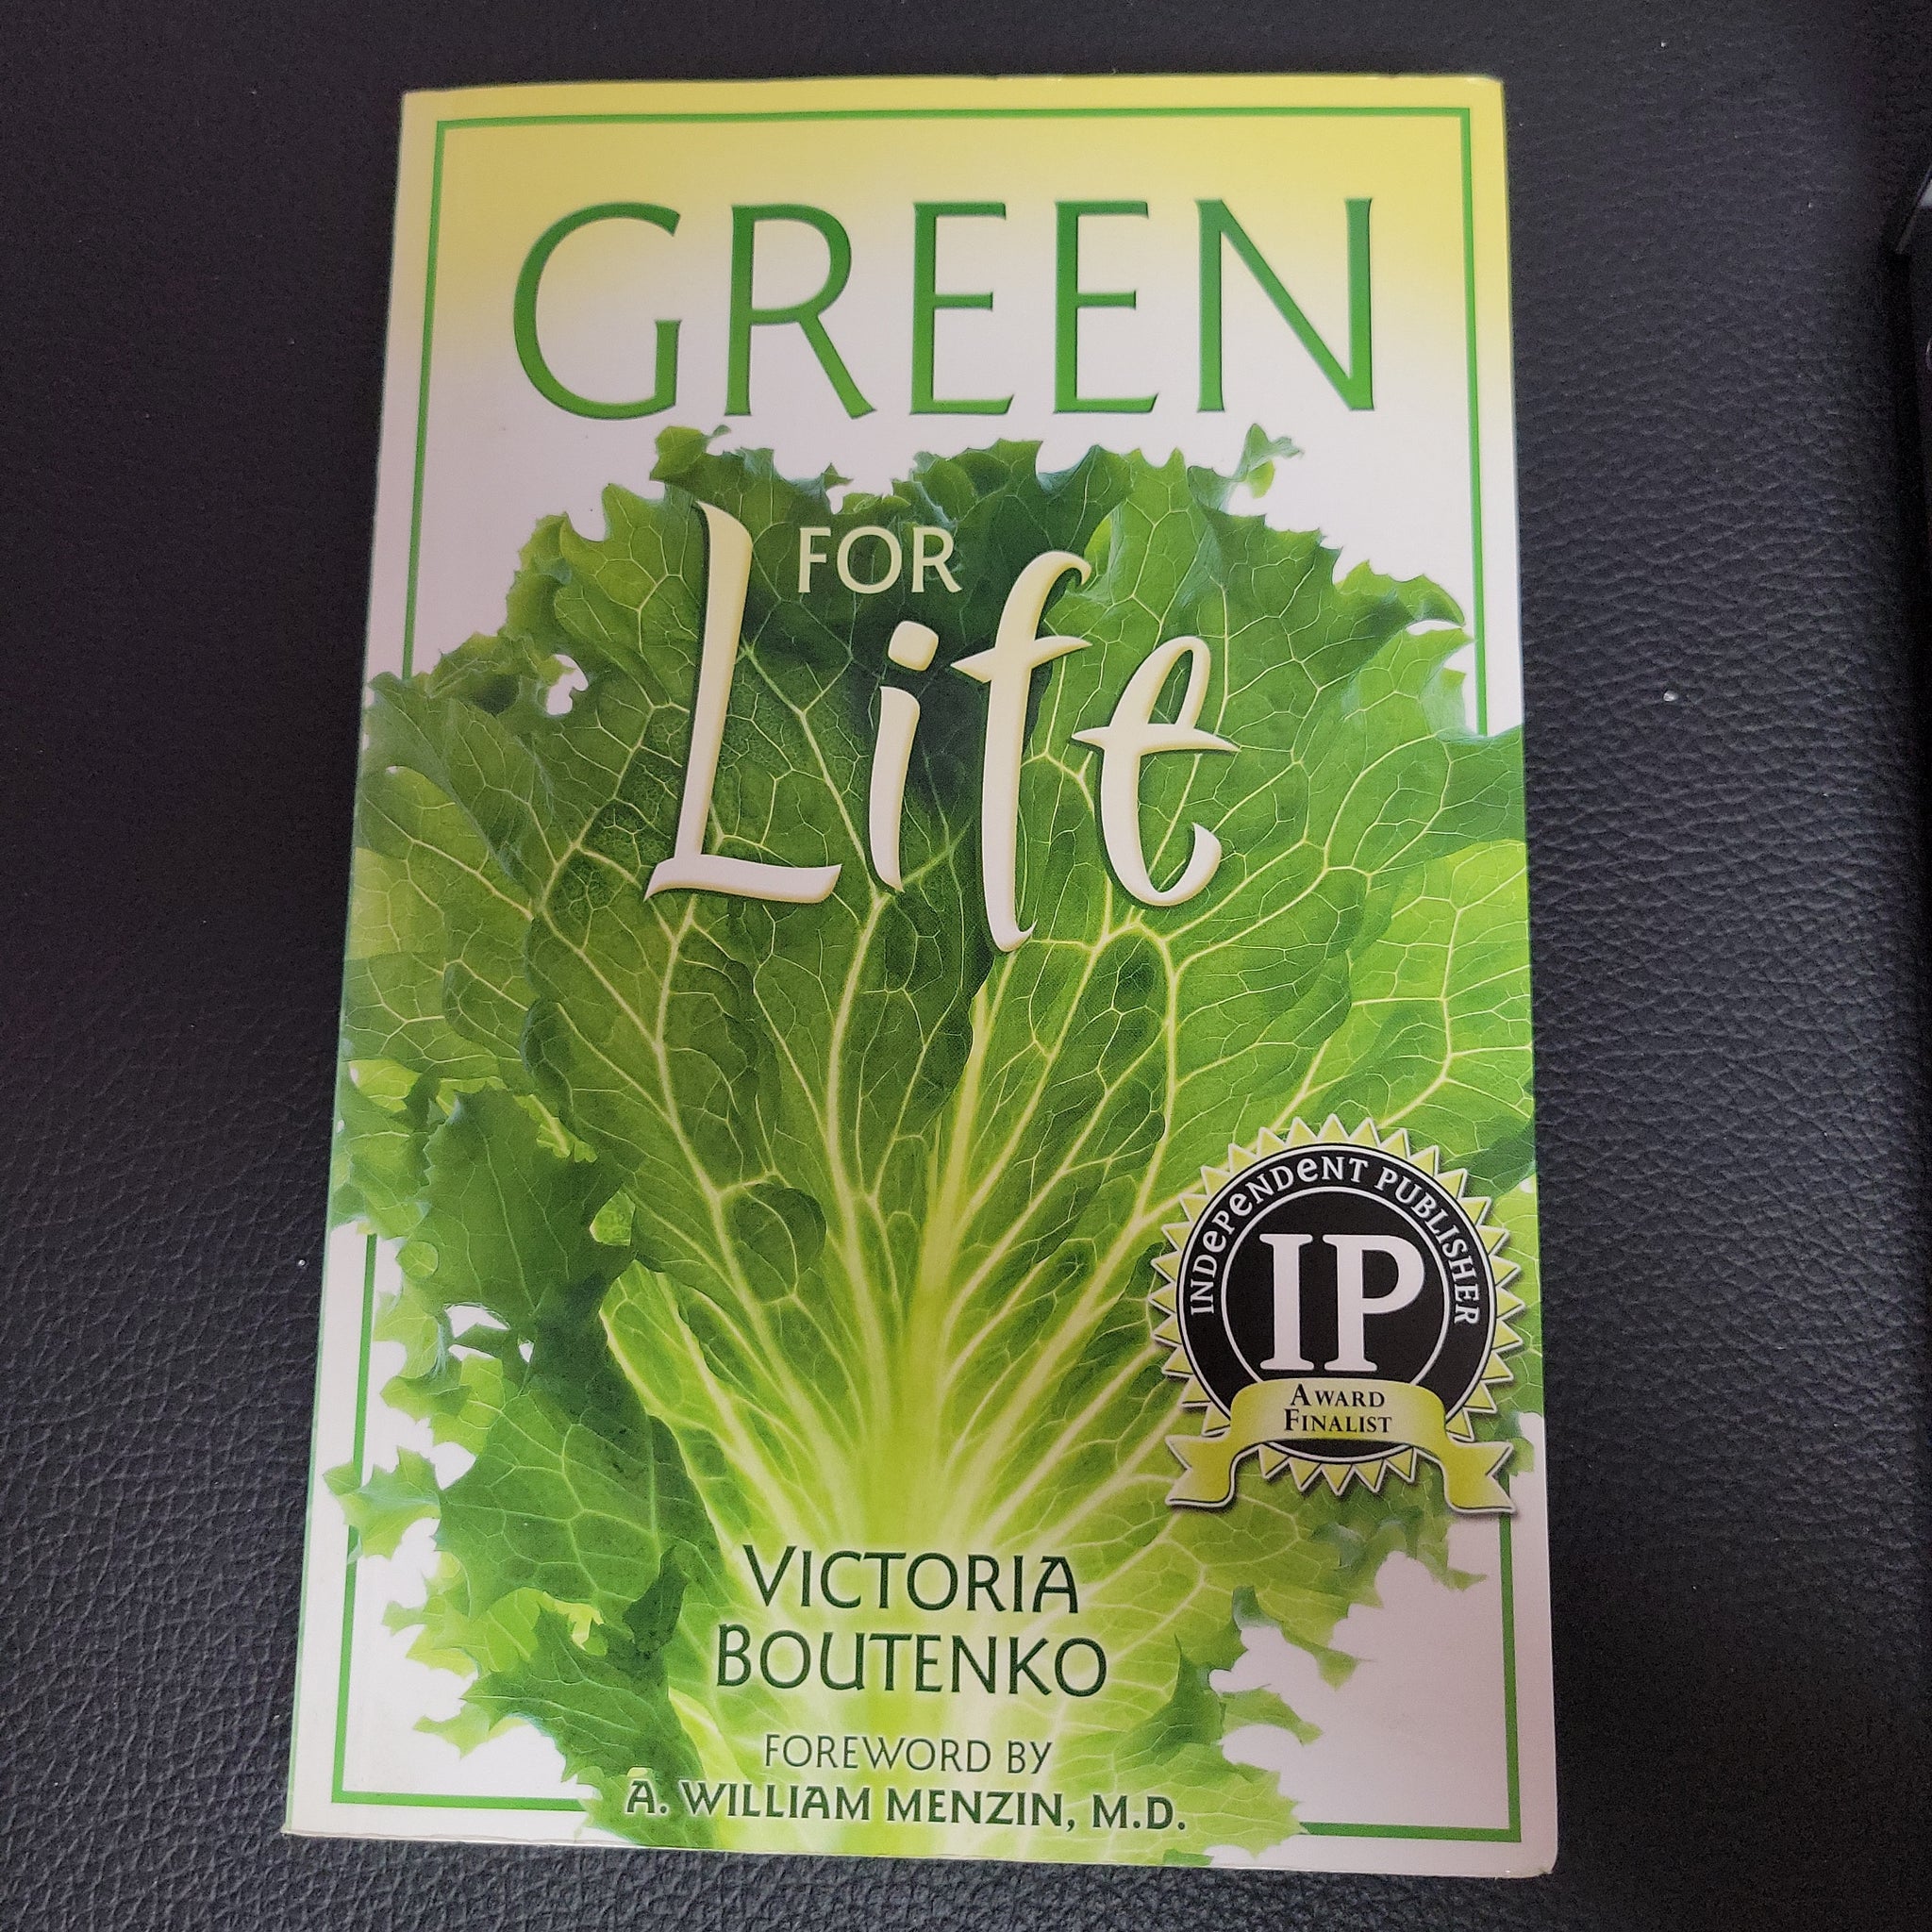 Green for Life by Victoria Boutenko